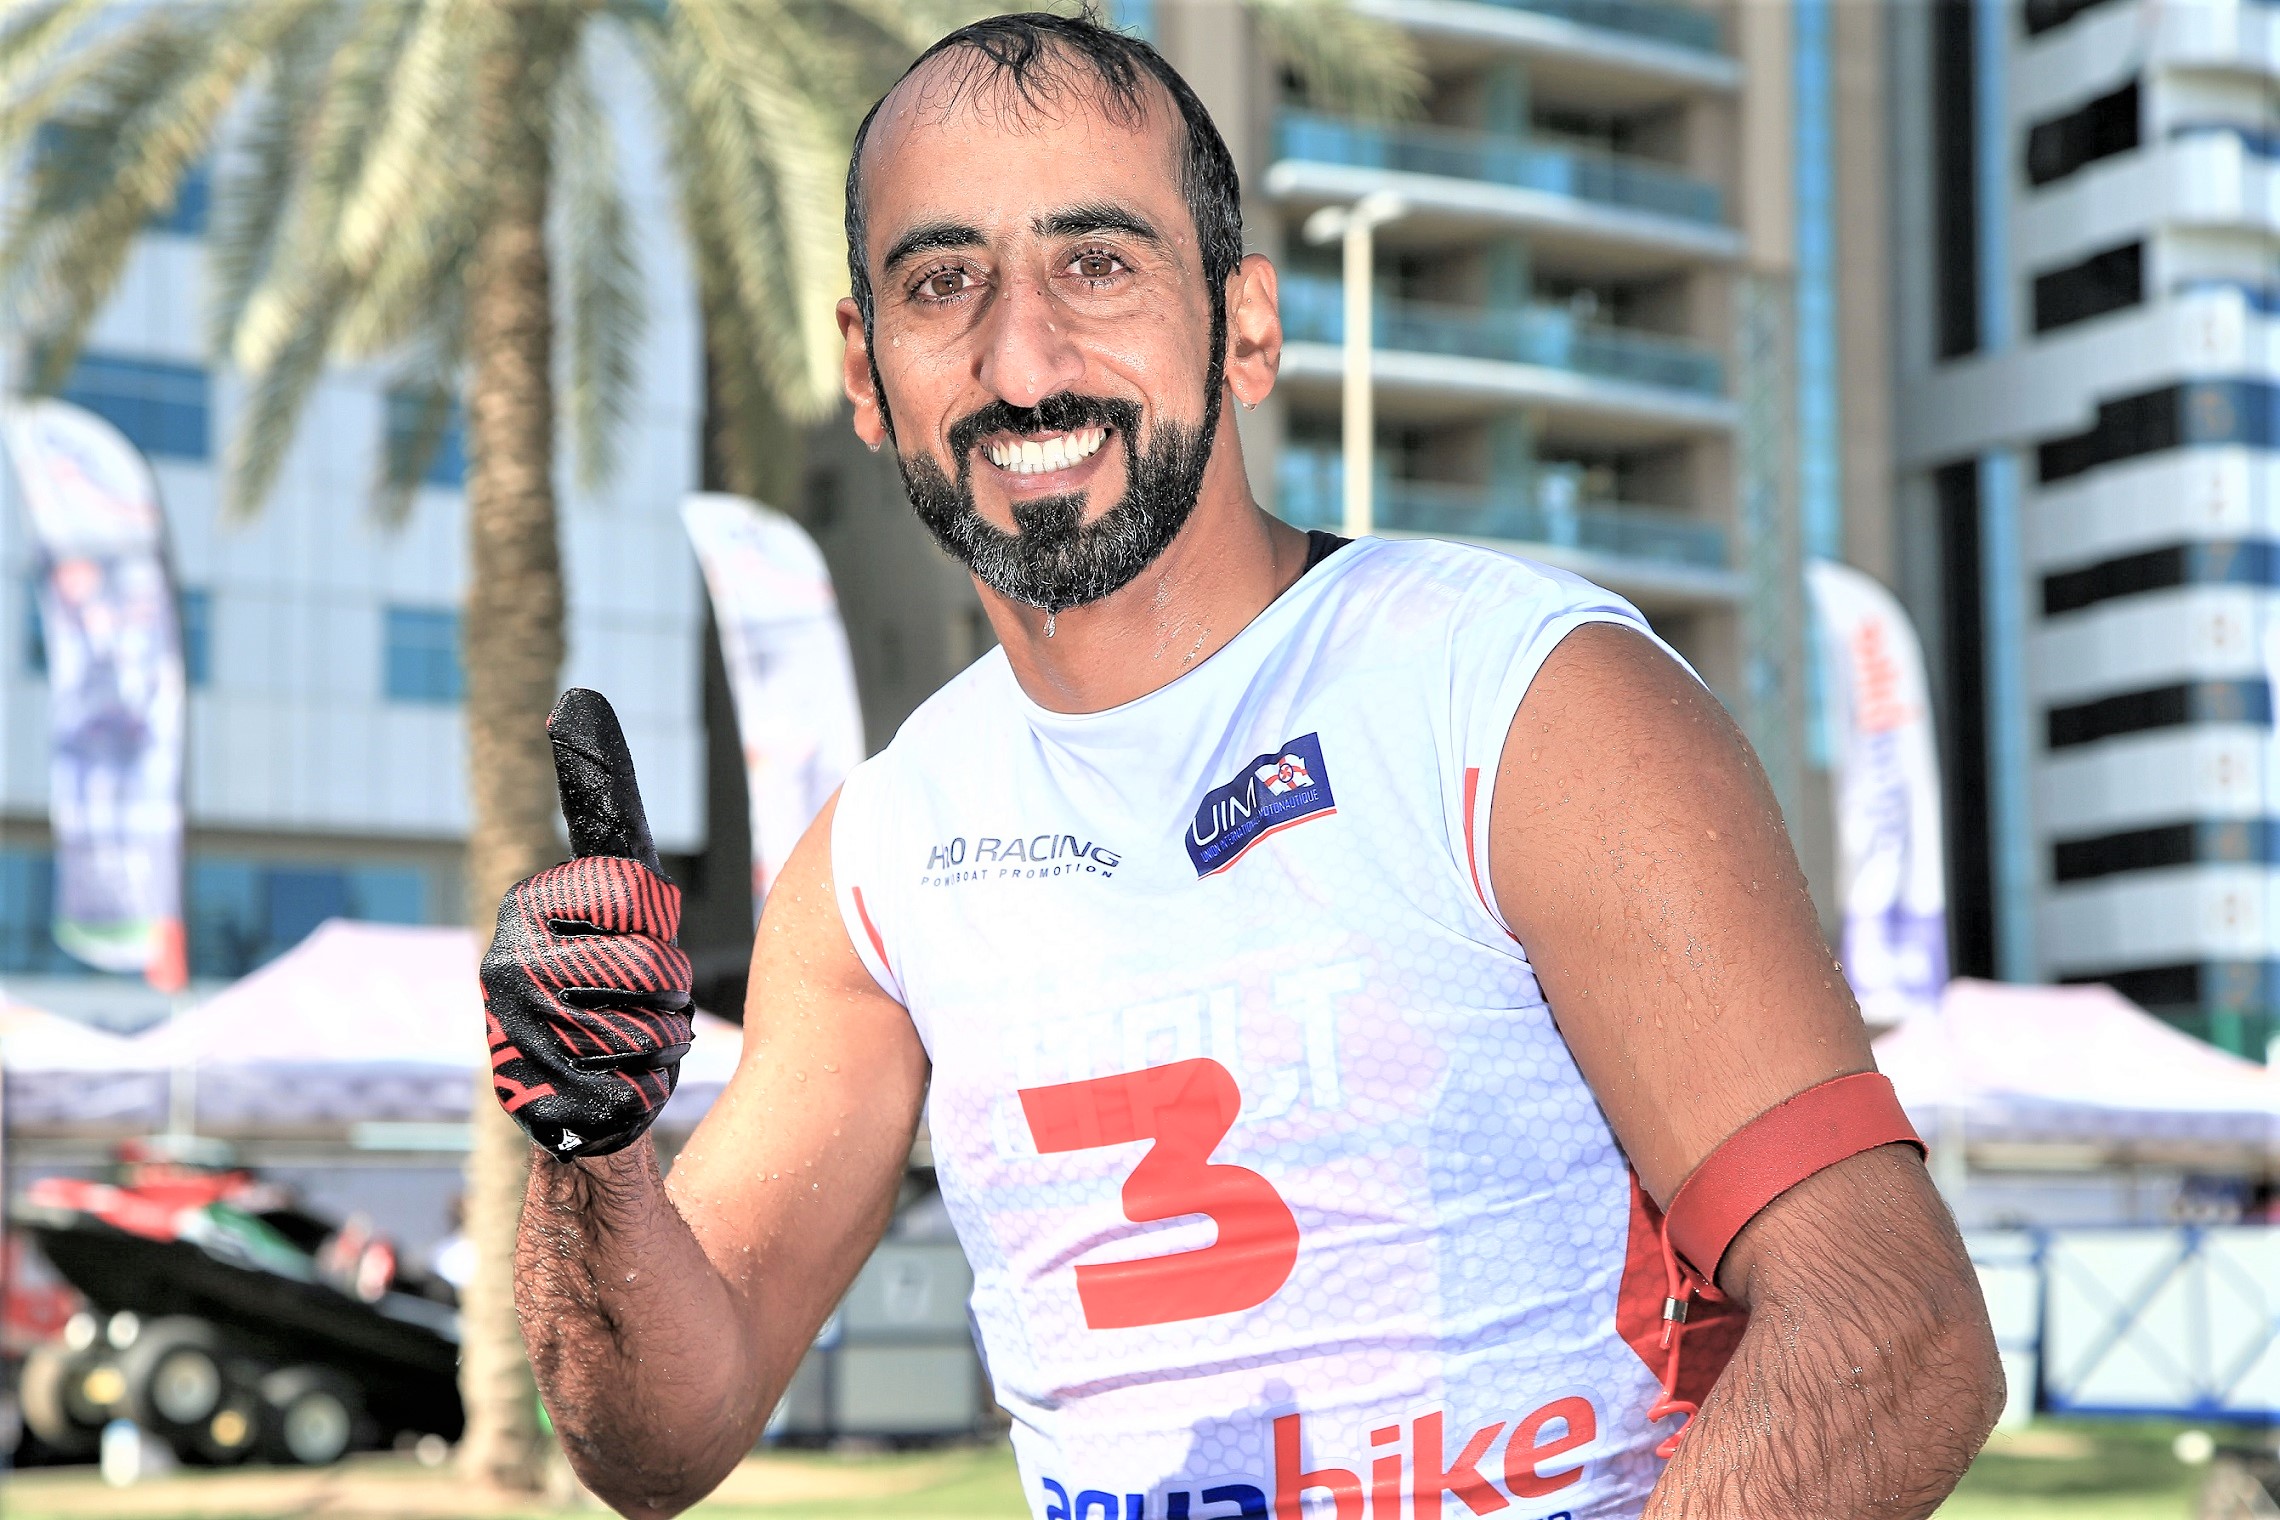 TEAM ABU DHABI’S AL MULLA AIMS TO START TITLE DEFENCE IN KUWAIT AFTER PAINFUL INJURY